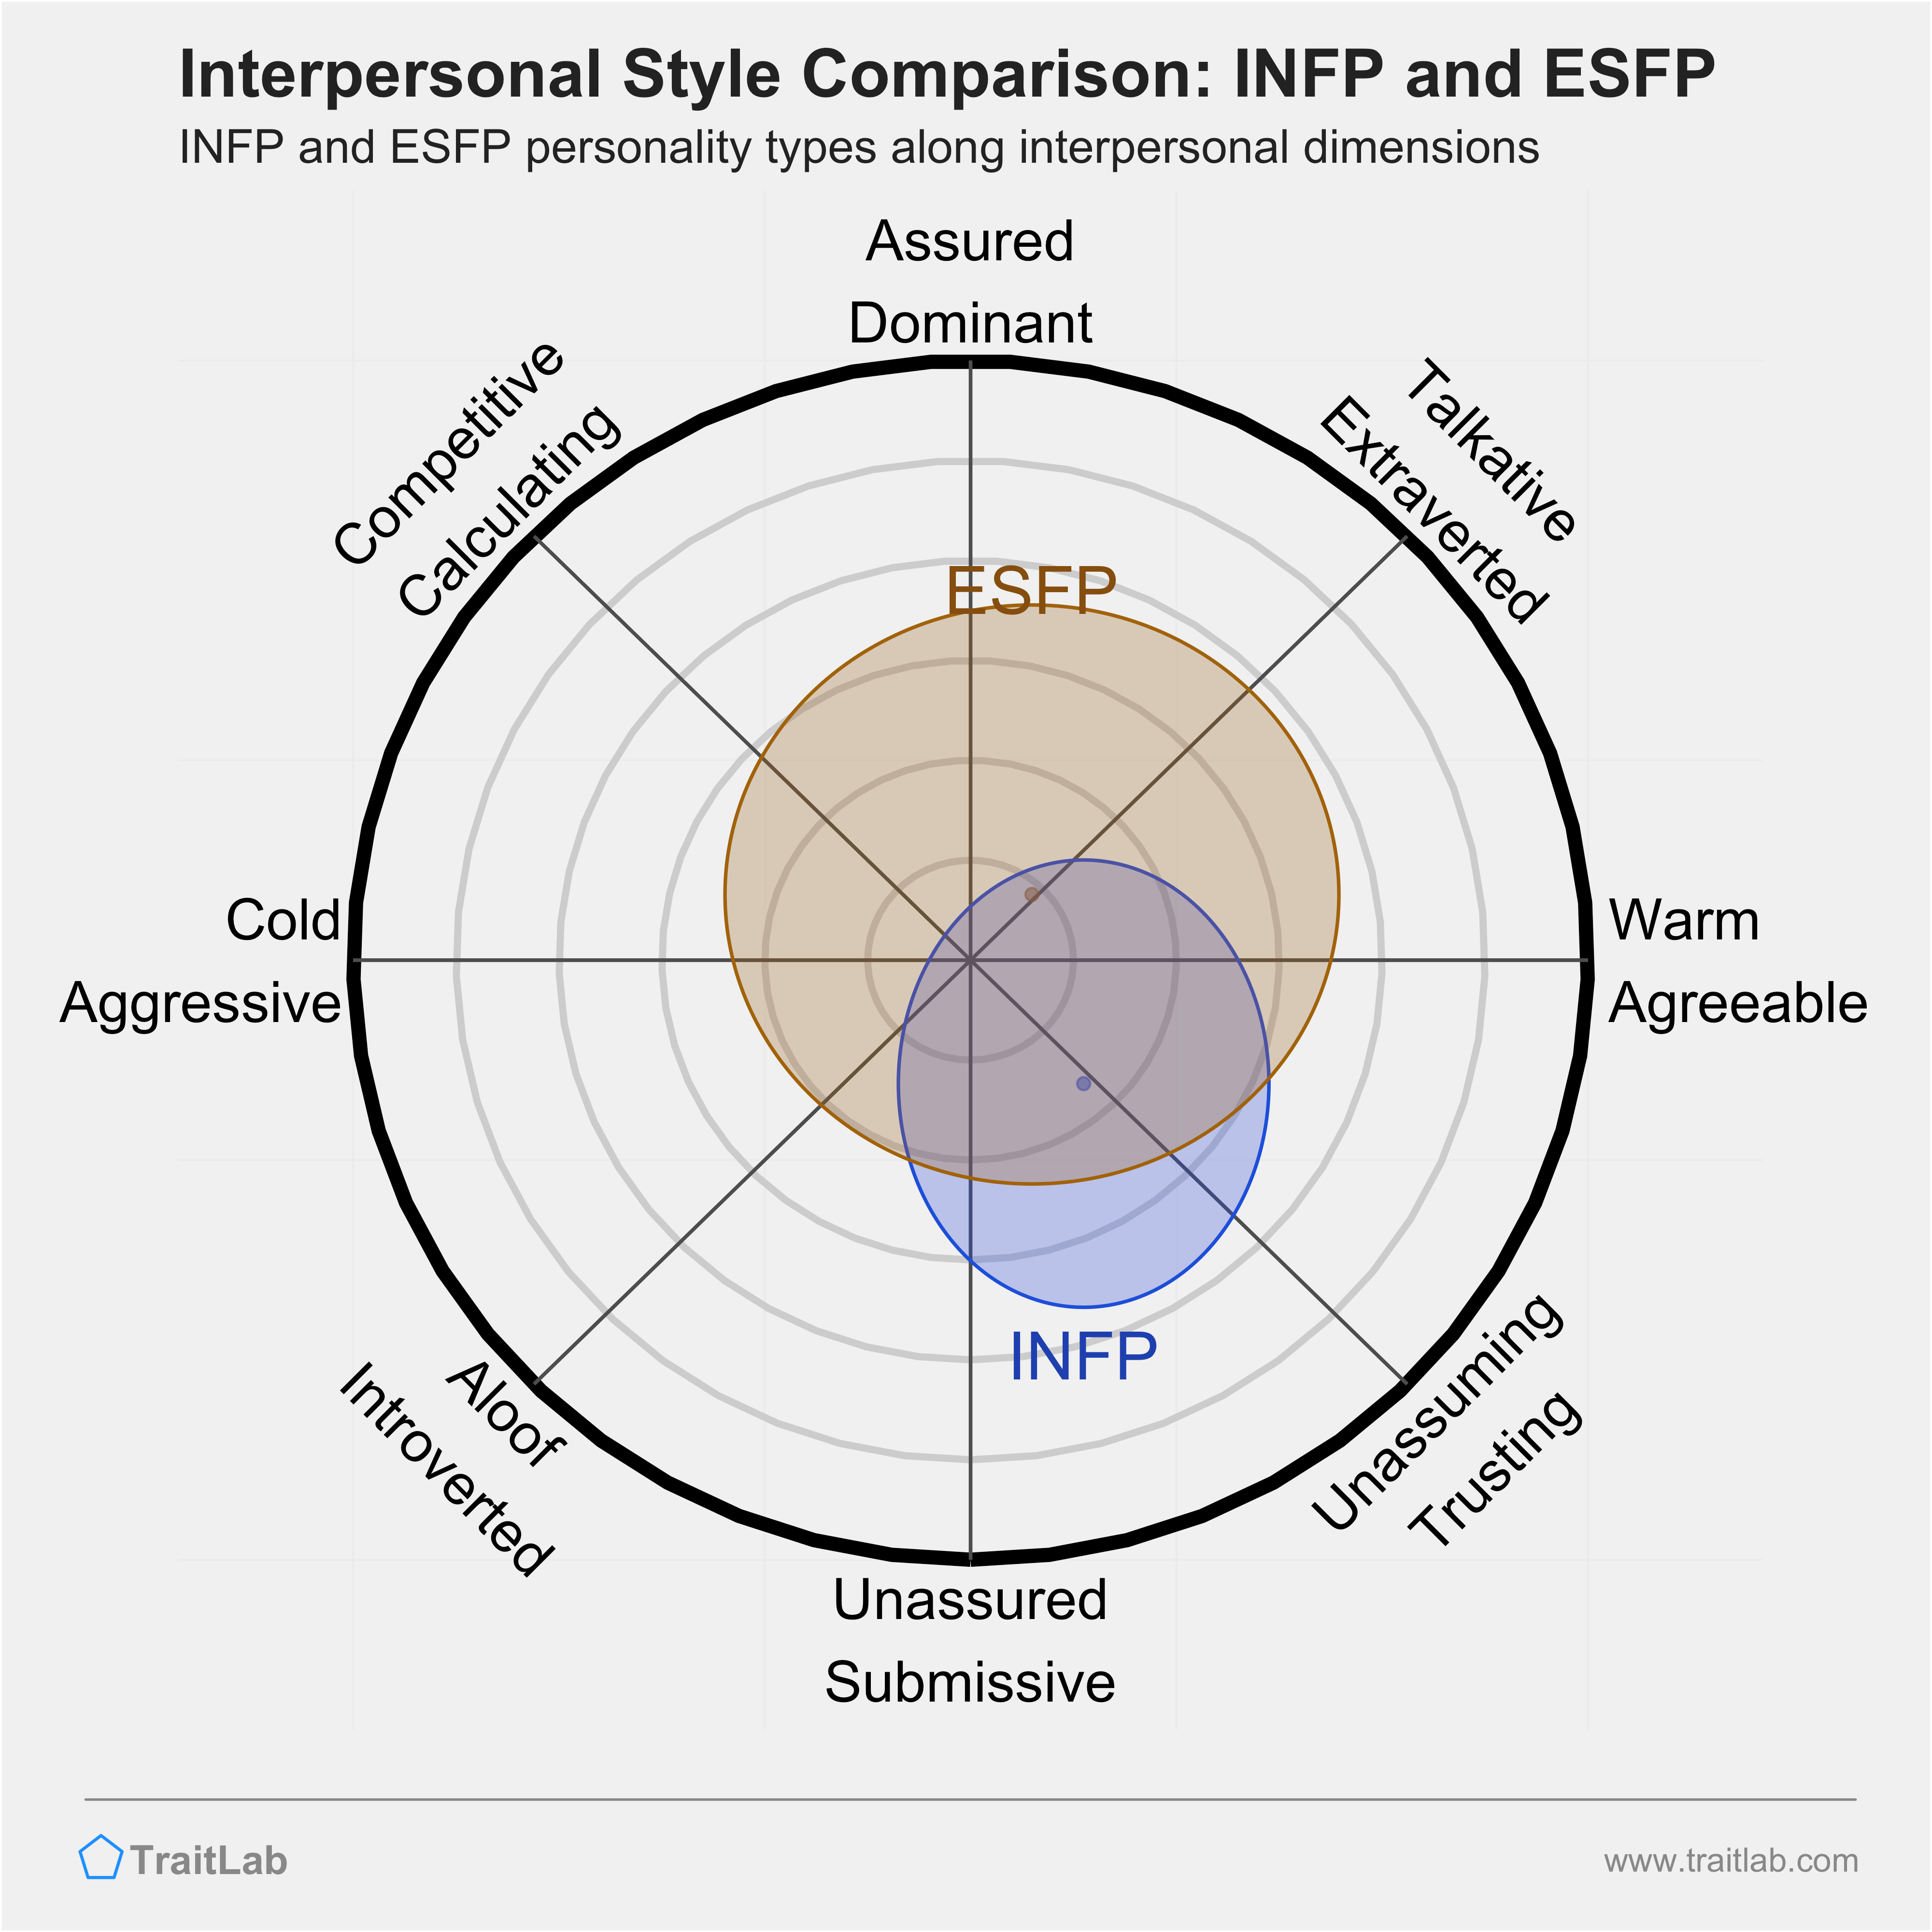 INFP and ESFP comparison across interpersonal dimensions